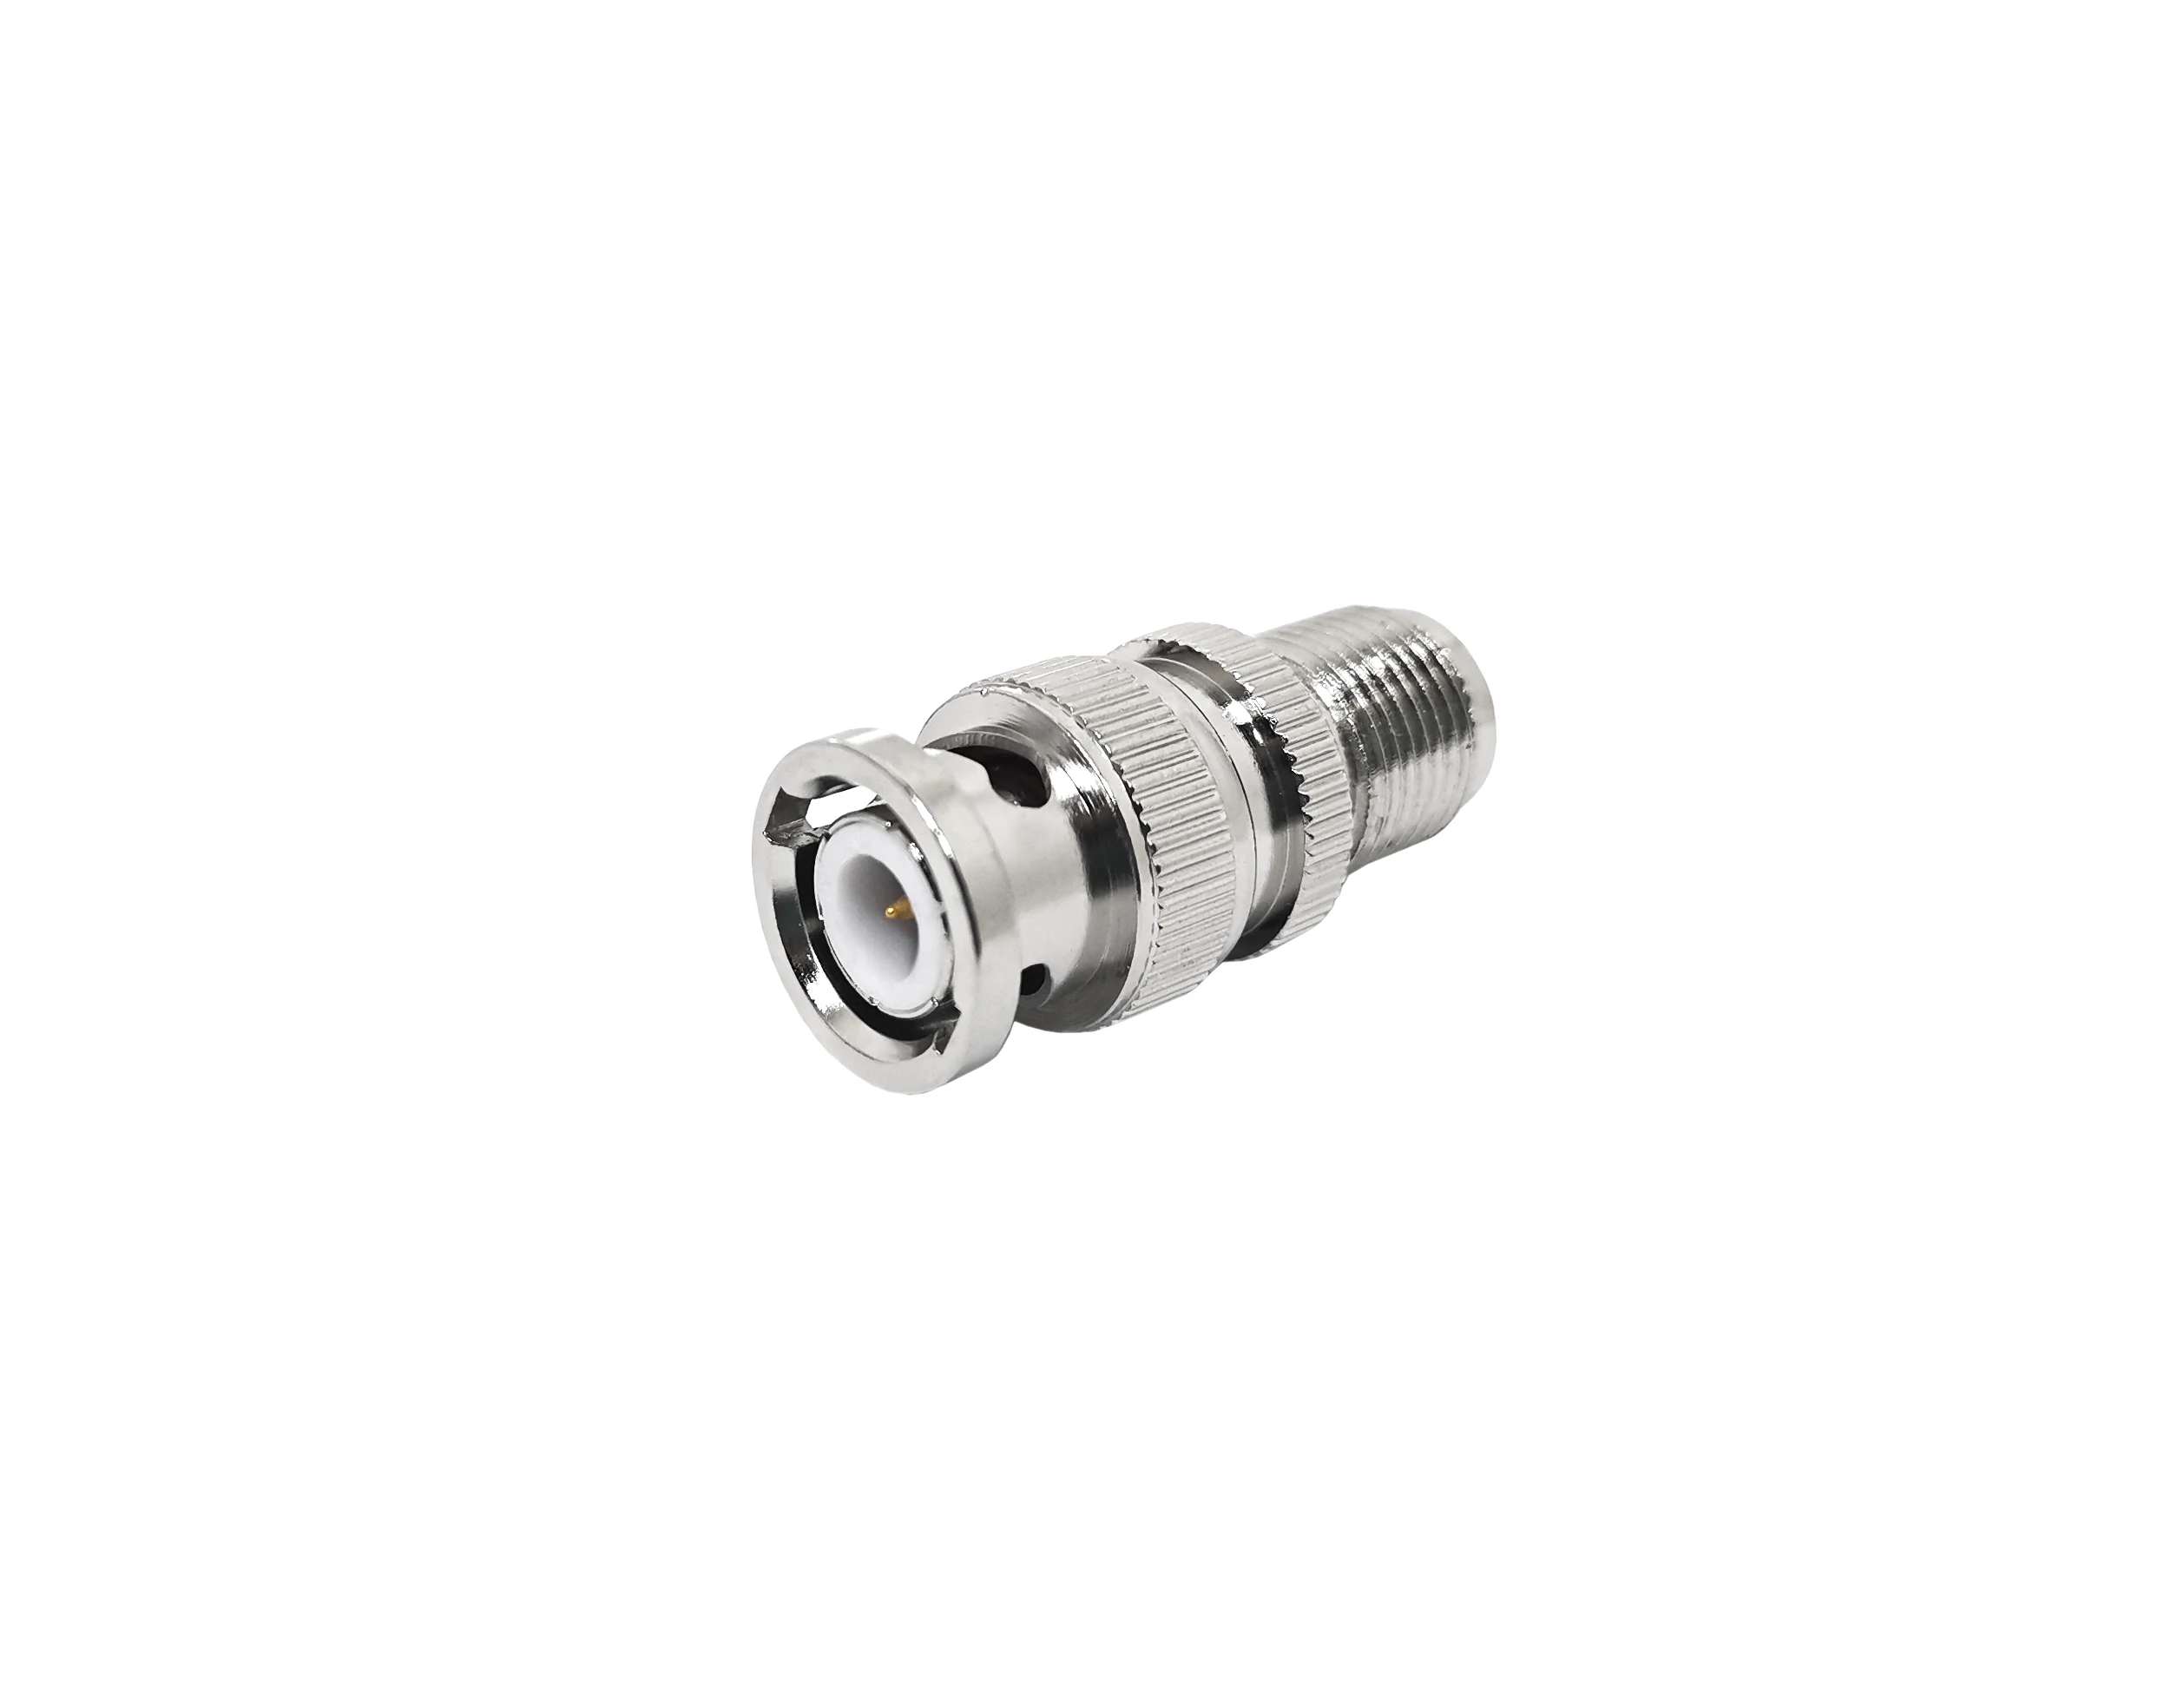 Copper RF Coaxial Connector TNC Female to BNC Male Adapter details